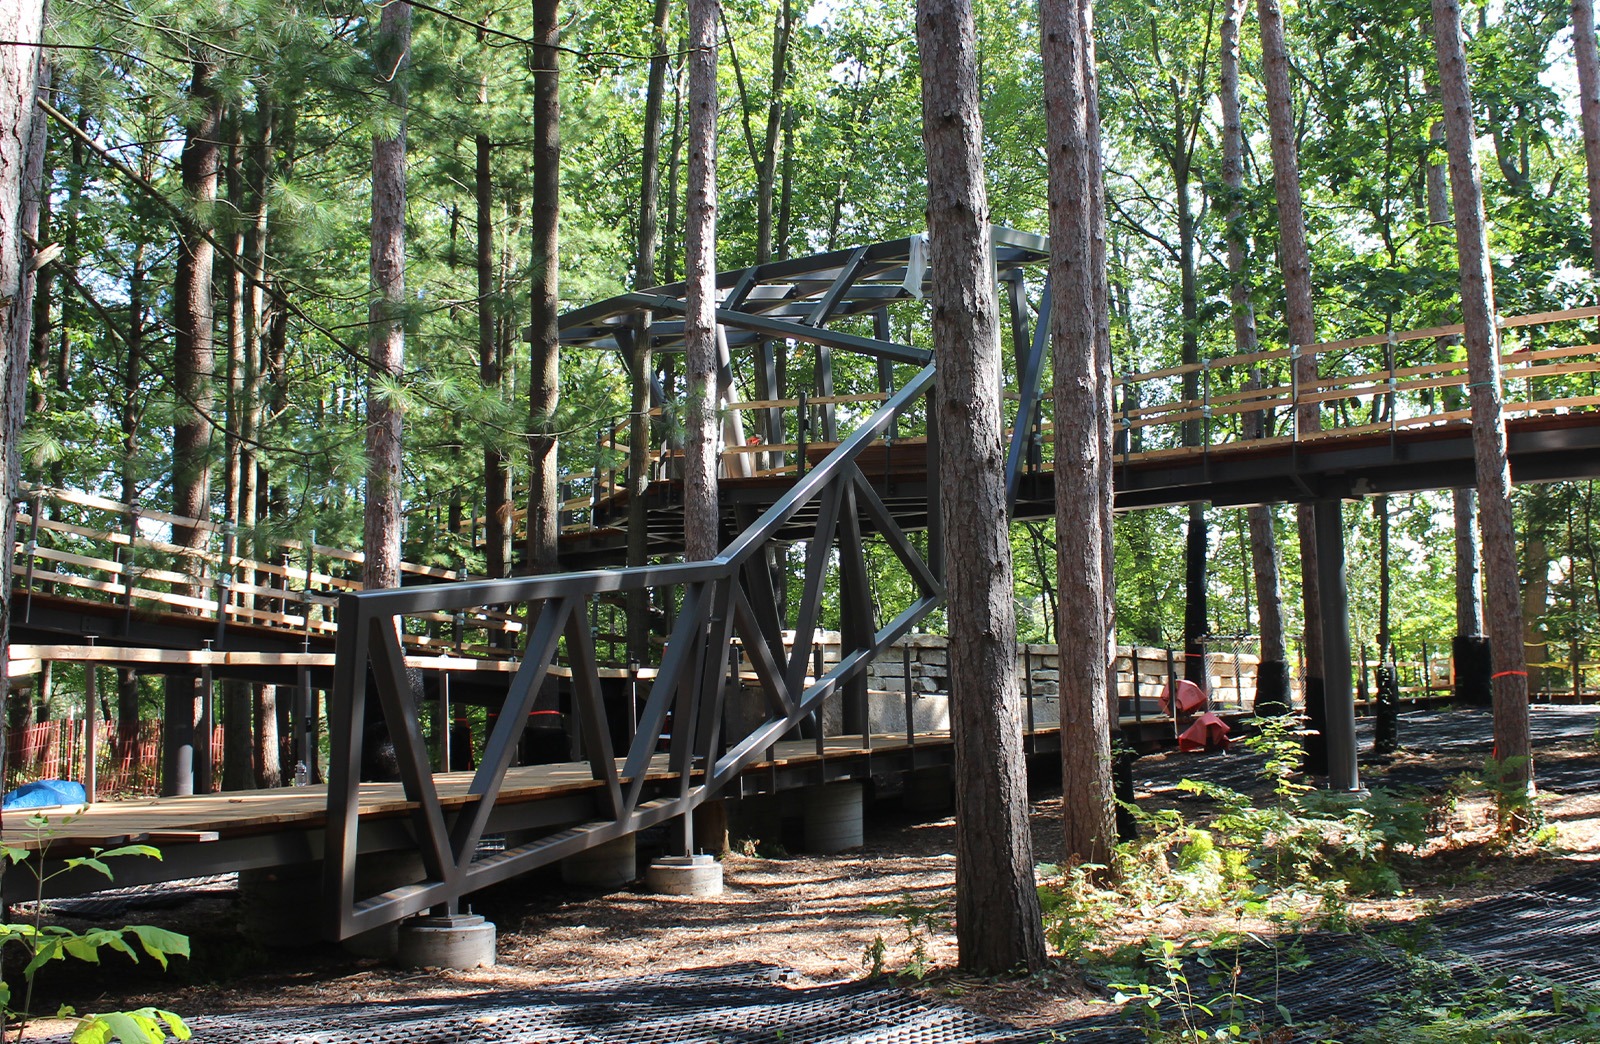 Whiting Forest under construction in September 2017